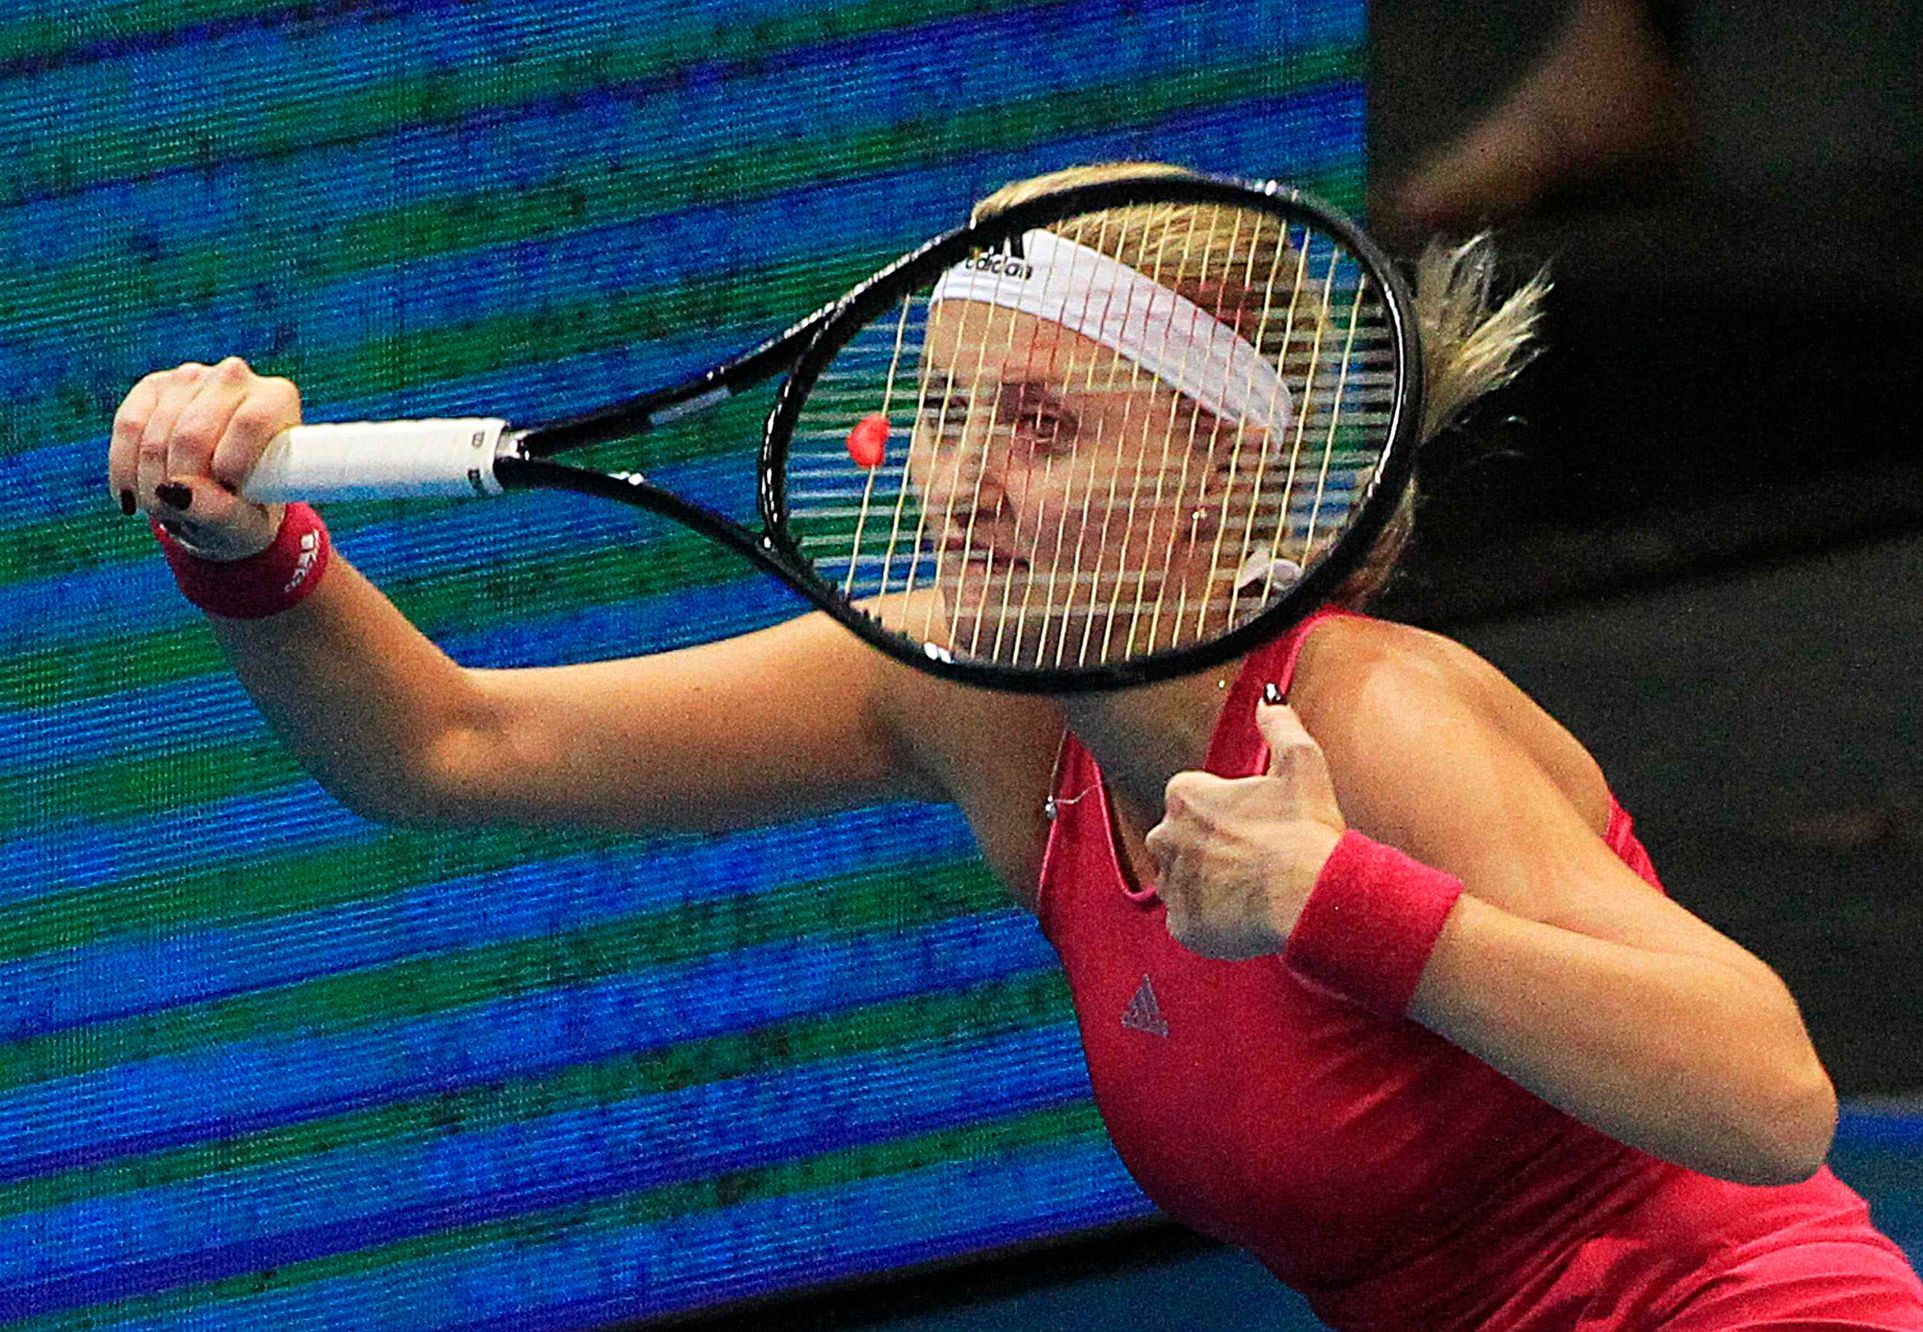 Mladenovic of the UAE Royals team reacts during her women's singles tennis match against Sharapova of the Manila Mavericks team at the IPTL competition in Manila